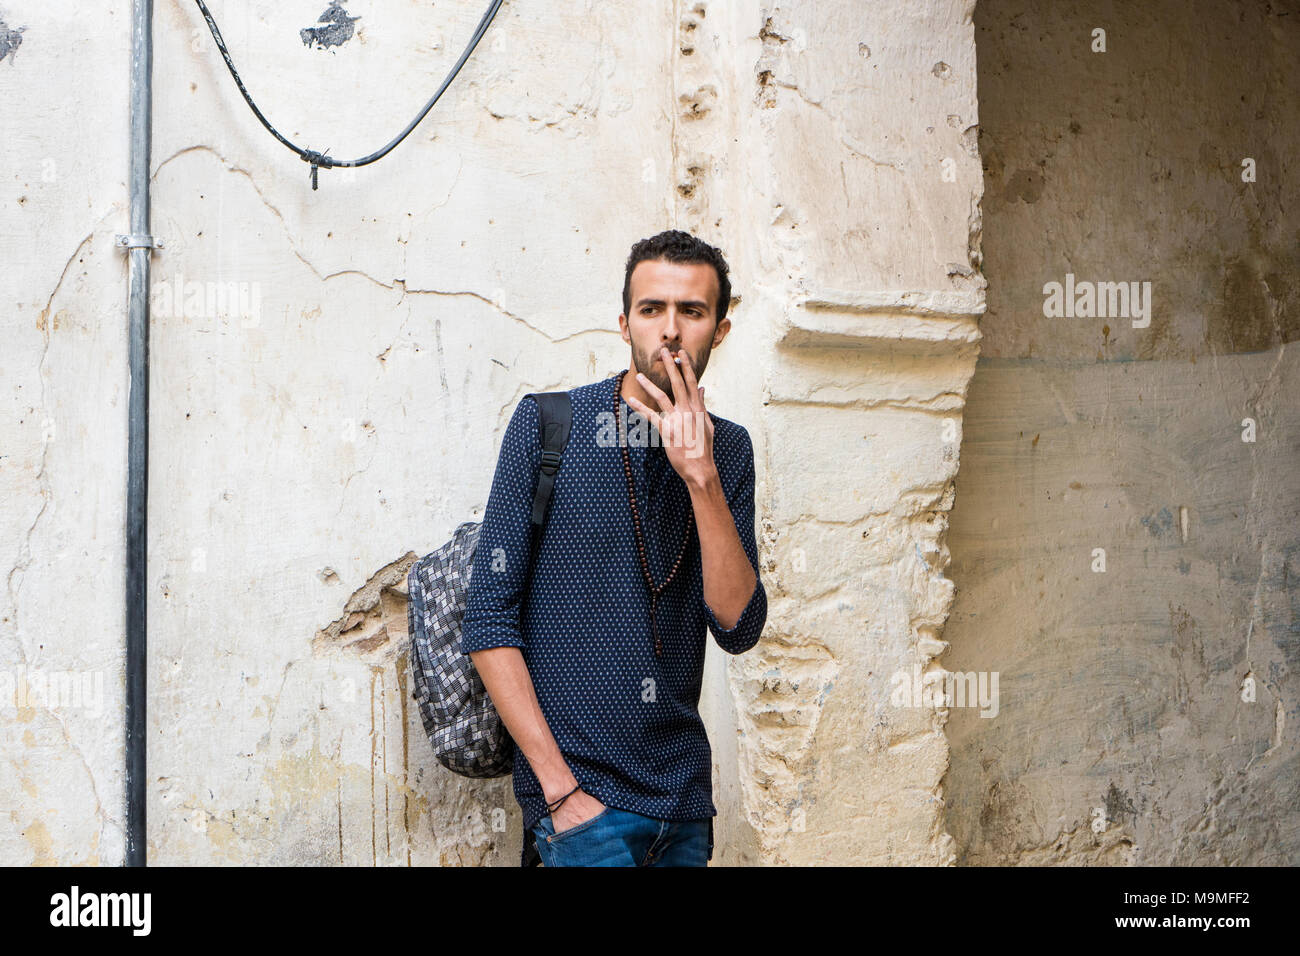 Young Muslim man smoking a cigarette in casual clothing standing by the ruined wall Stock Photo